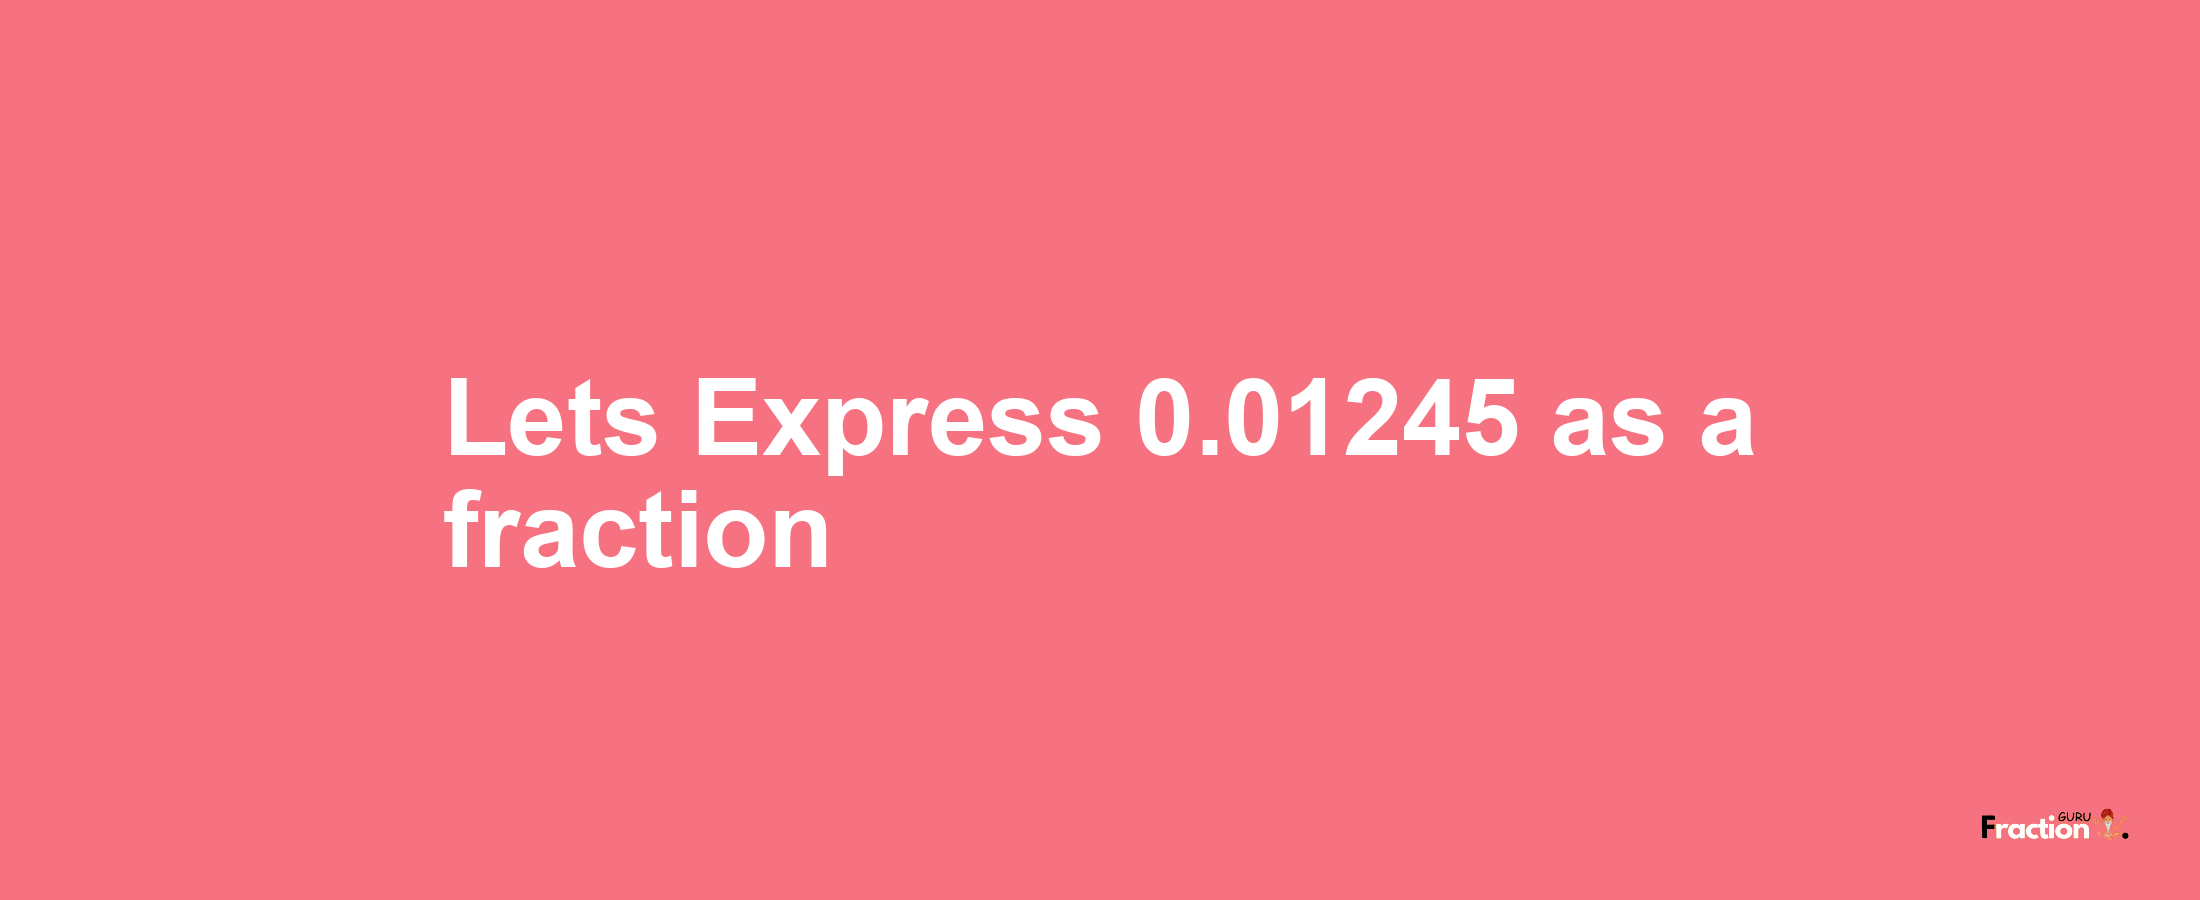 Lets Express 0.01245 as afraction